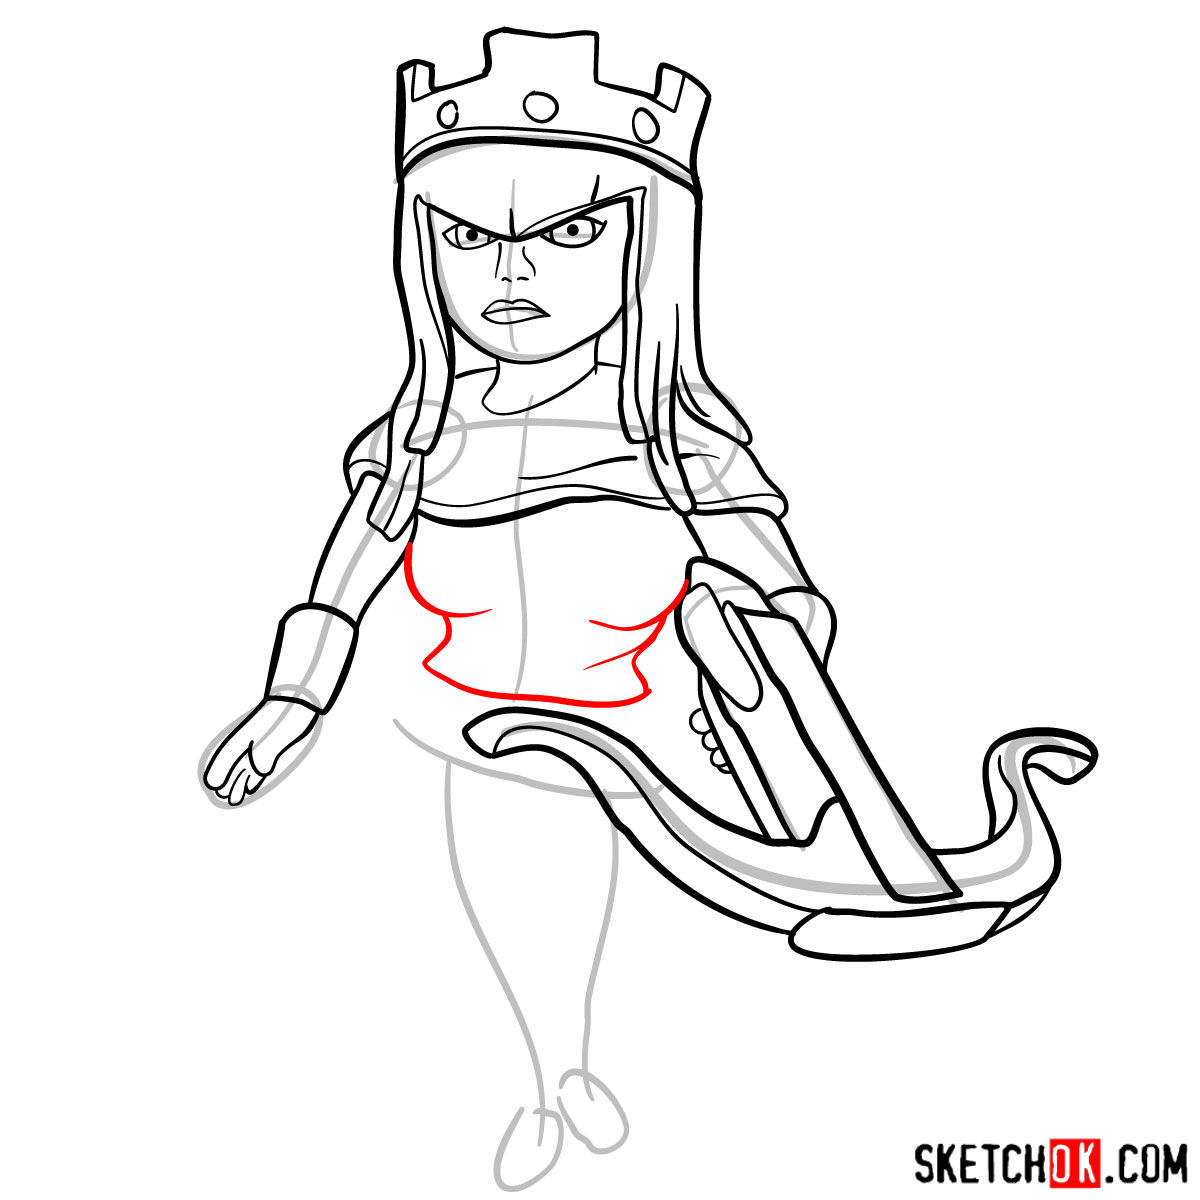 How to draw Archer Queen from Clash of Clans game - step 10